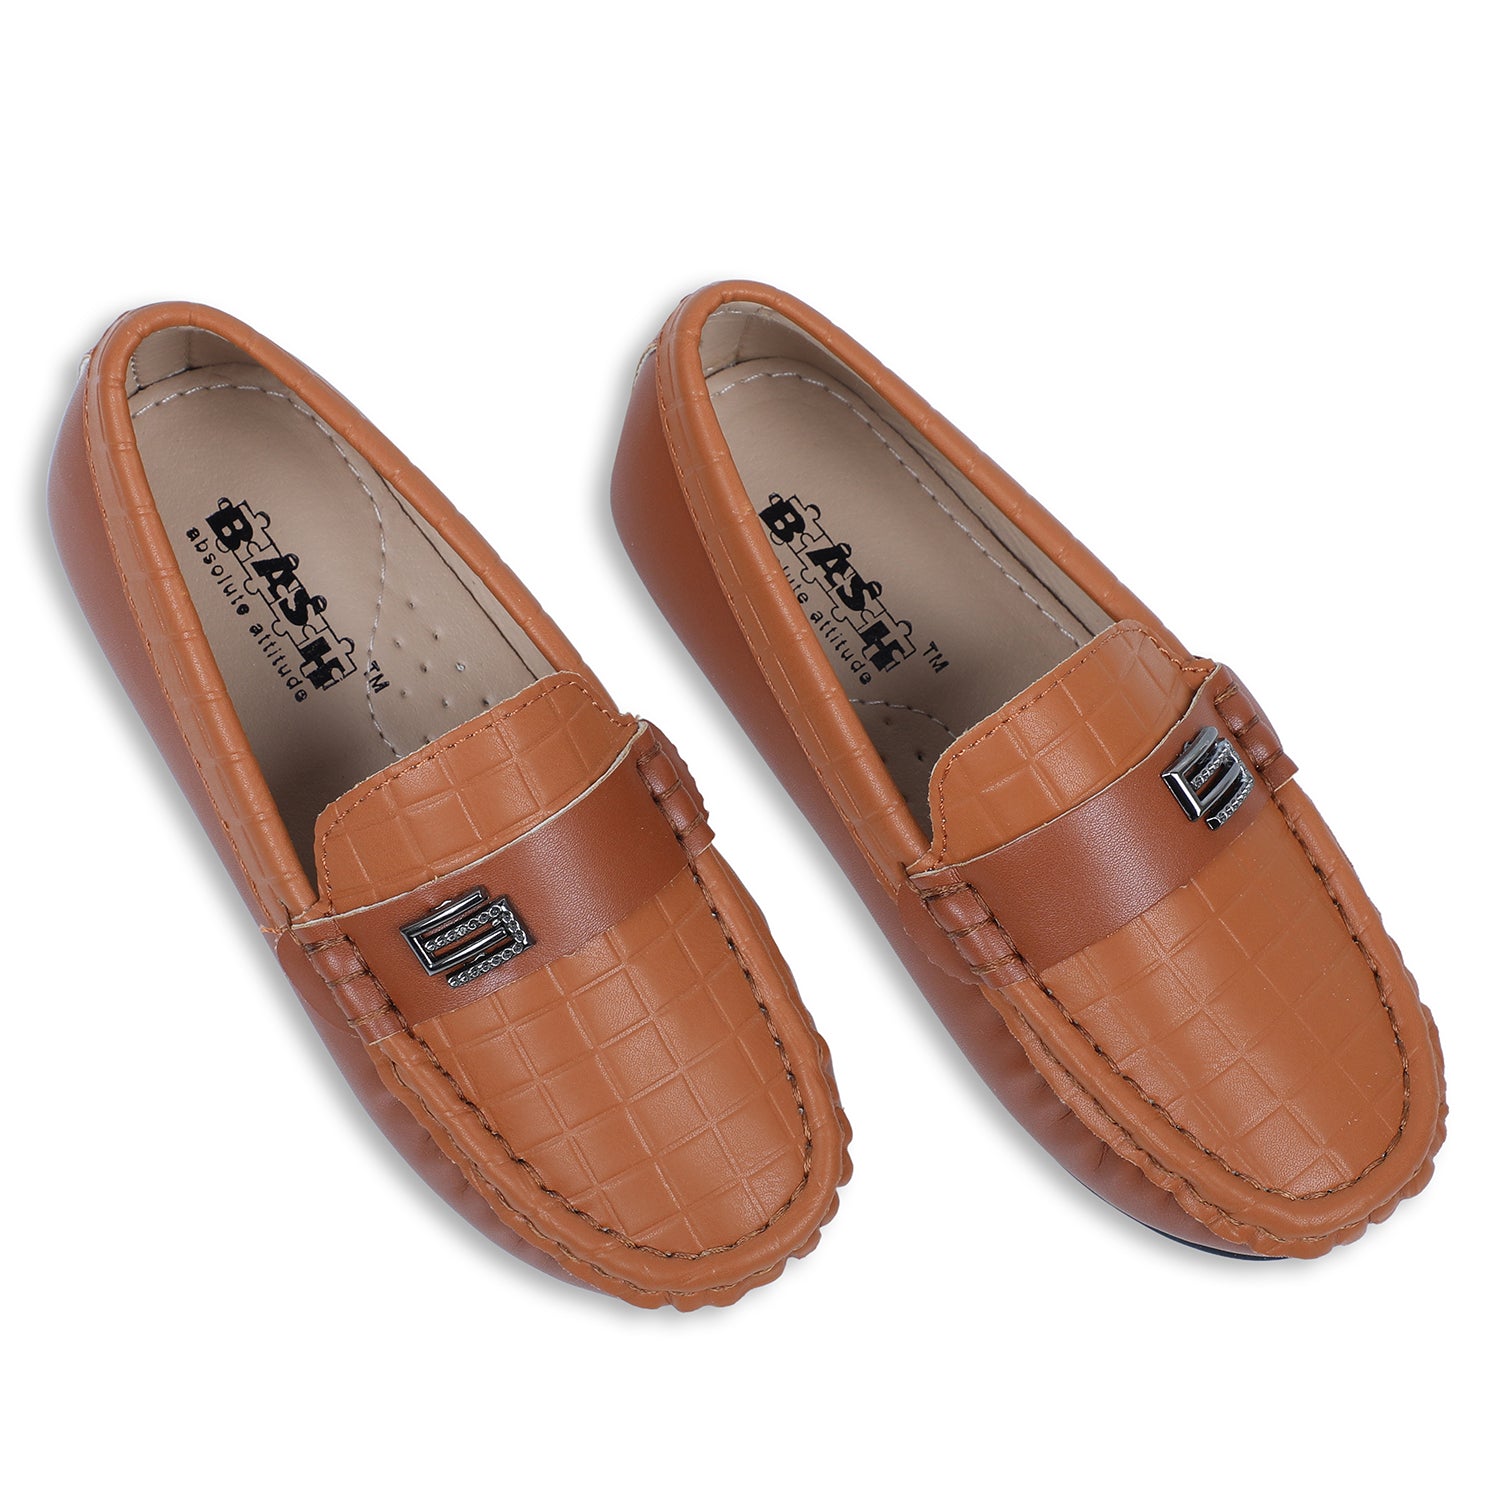 Baby Moo x Bash Kids Embossed Leatherite Loafer Shoes - Tan